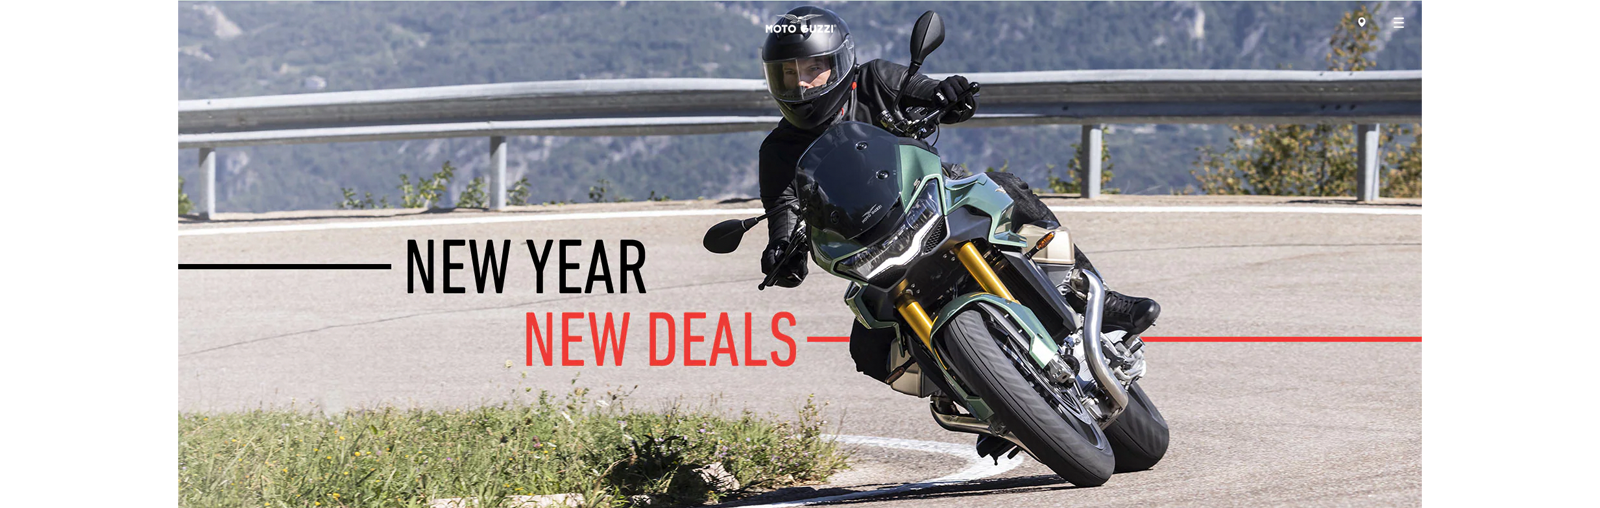 New Year New Deals